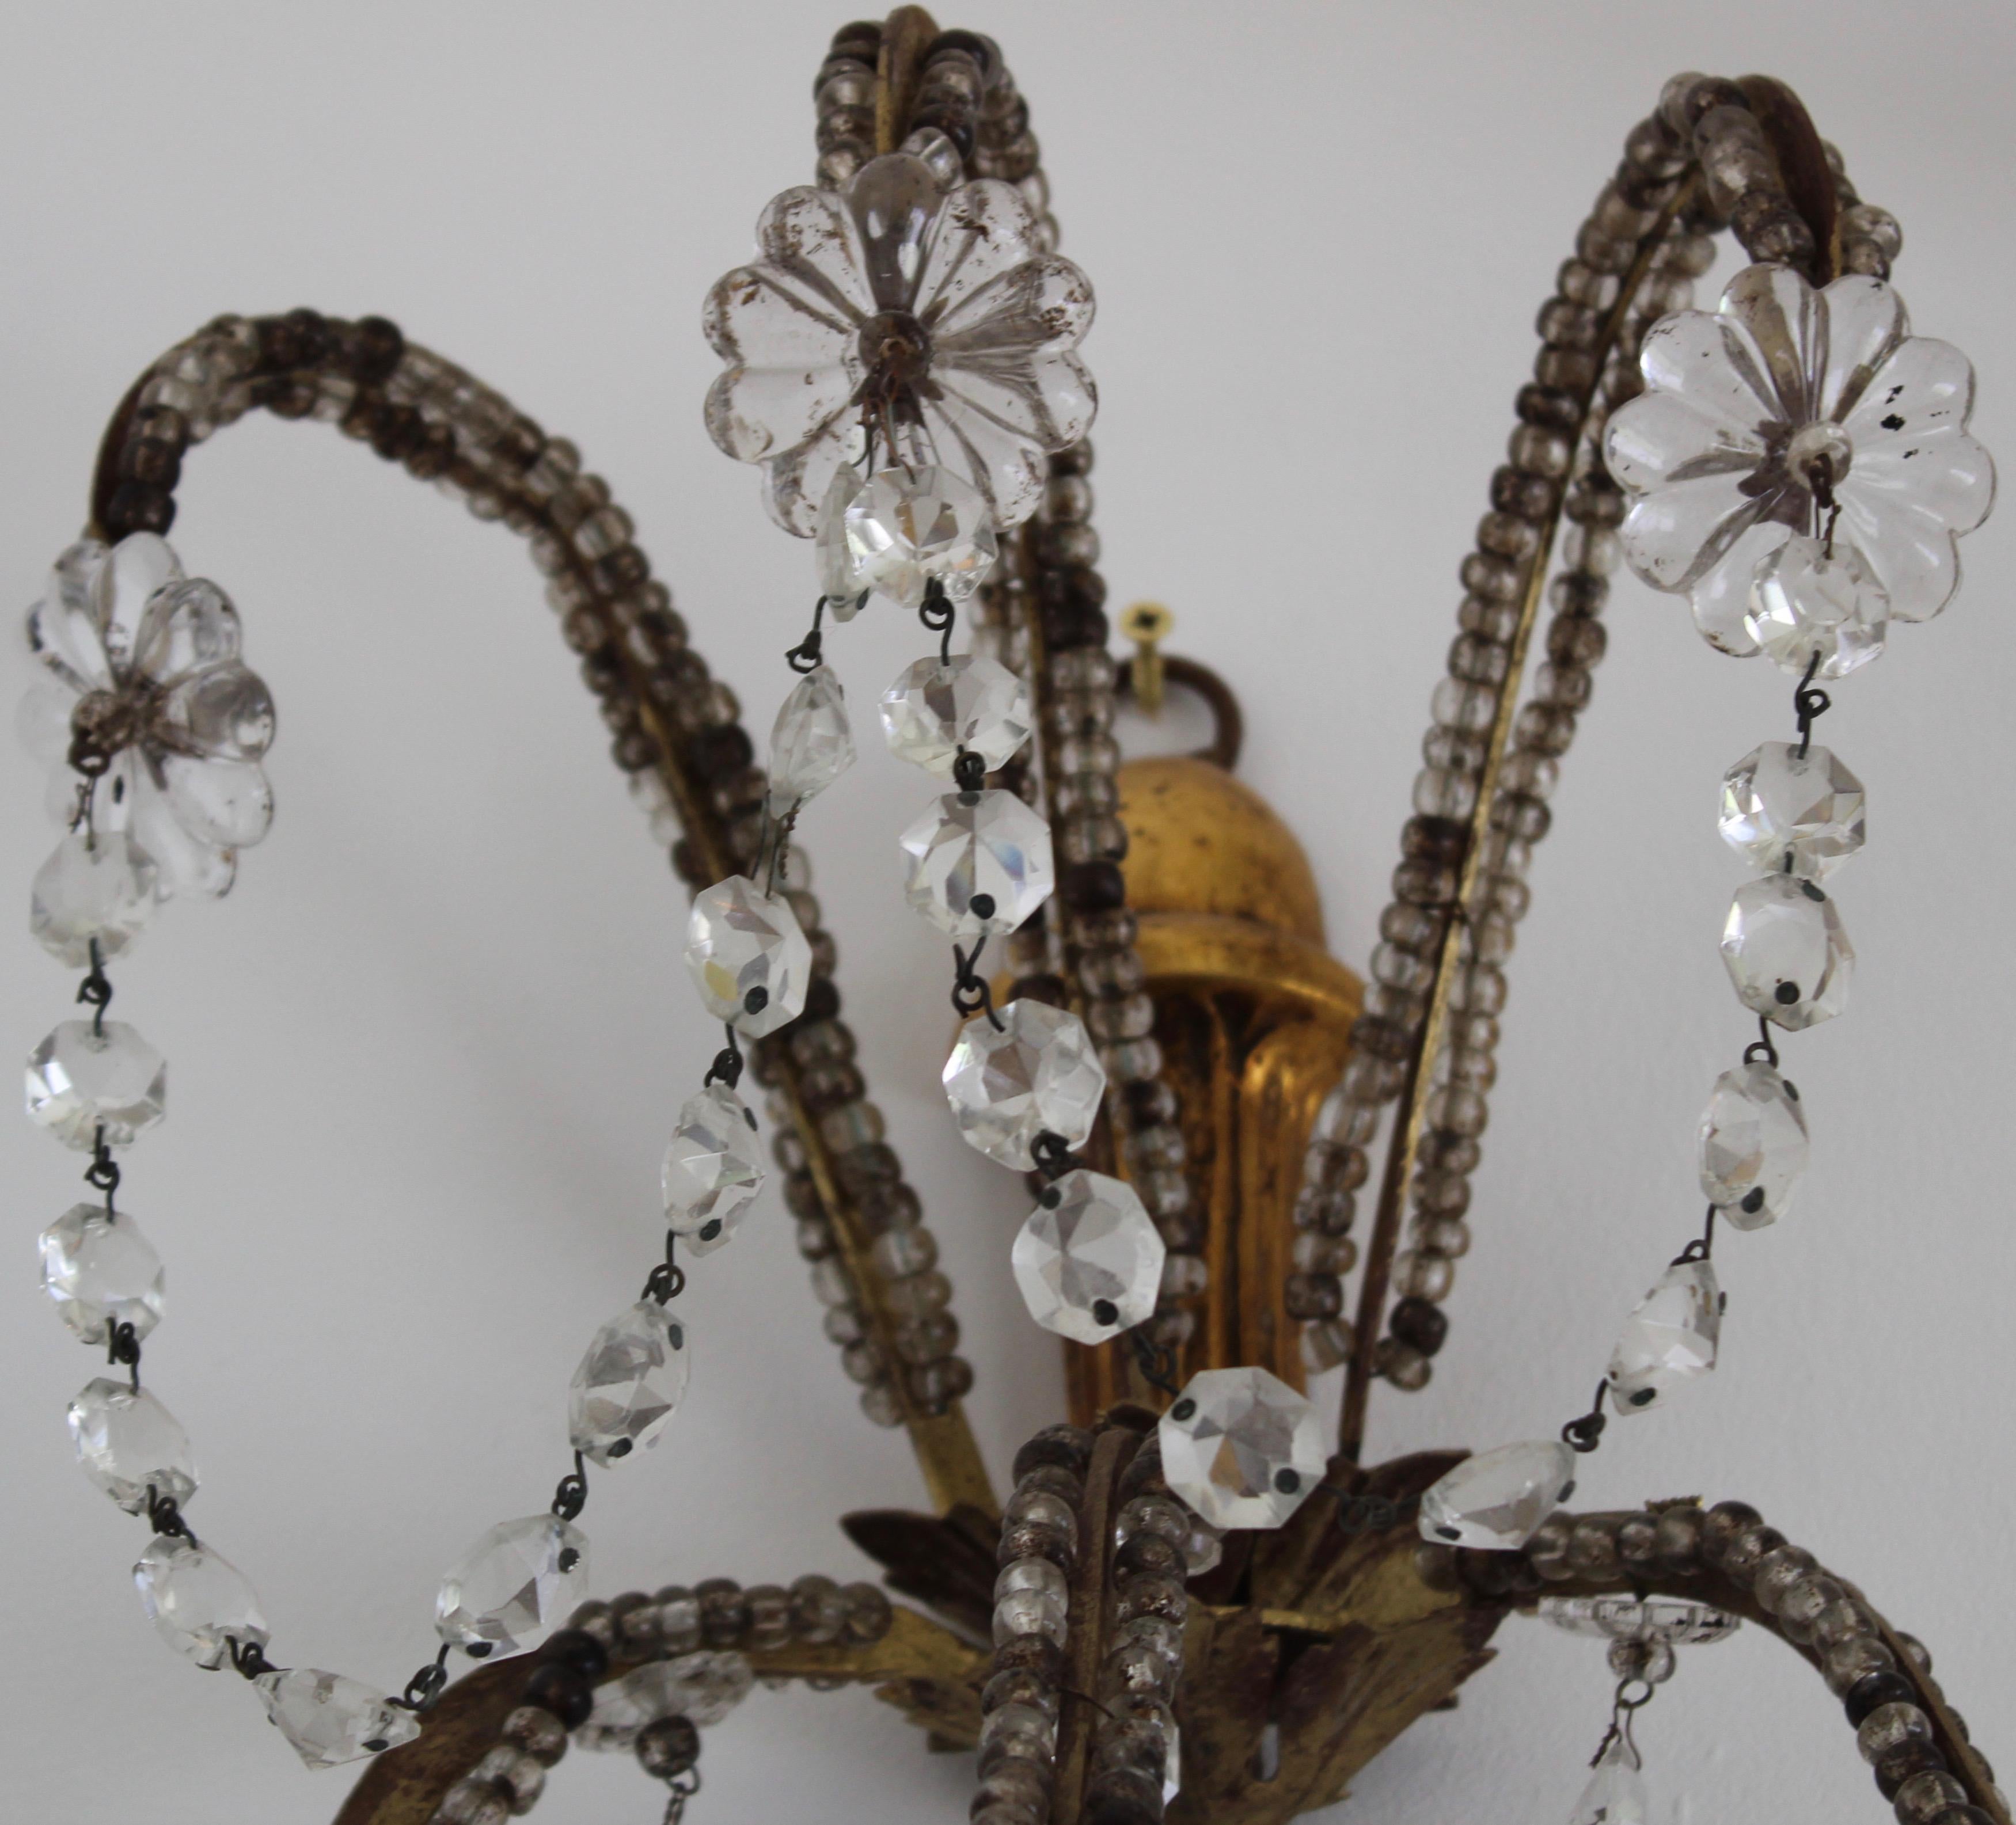 Pair of unwired beaded glass wall sconces, on a large open giltwood frame, with a carved gilt finial at the base, from which emerge 5 arms finished with candleholders. The frame extending and curving upwards with strands of glass beading along the